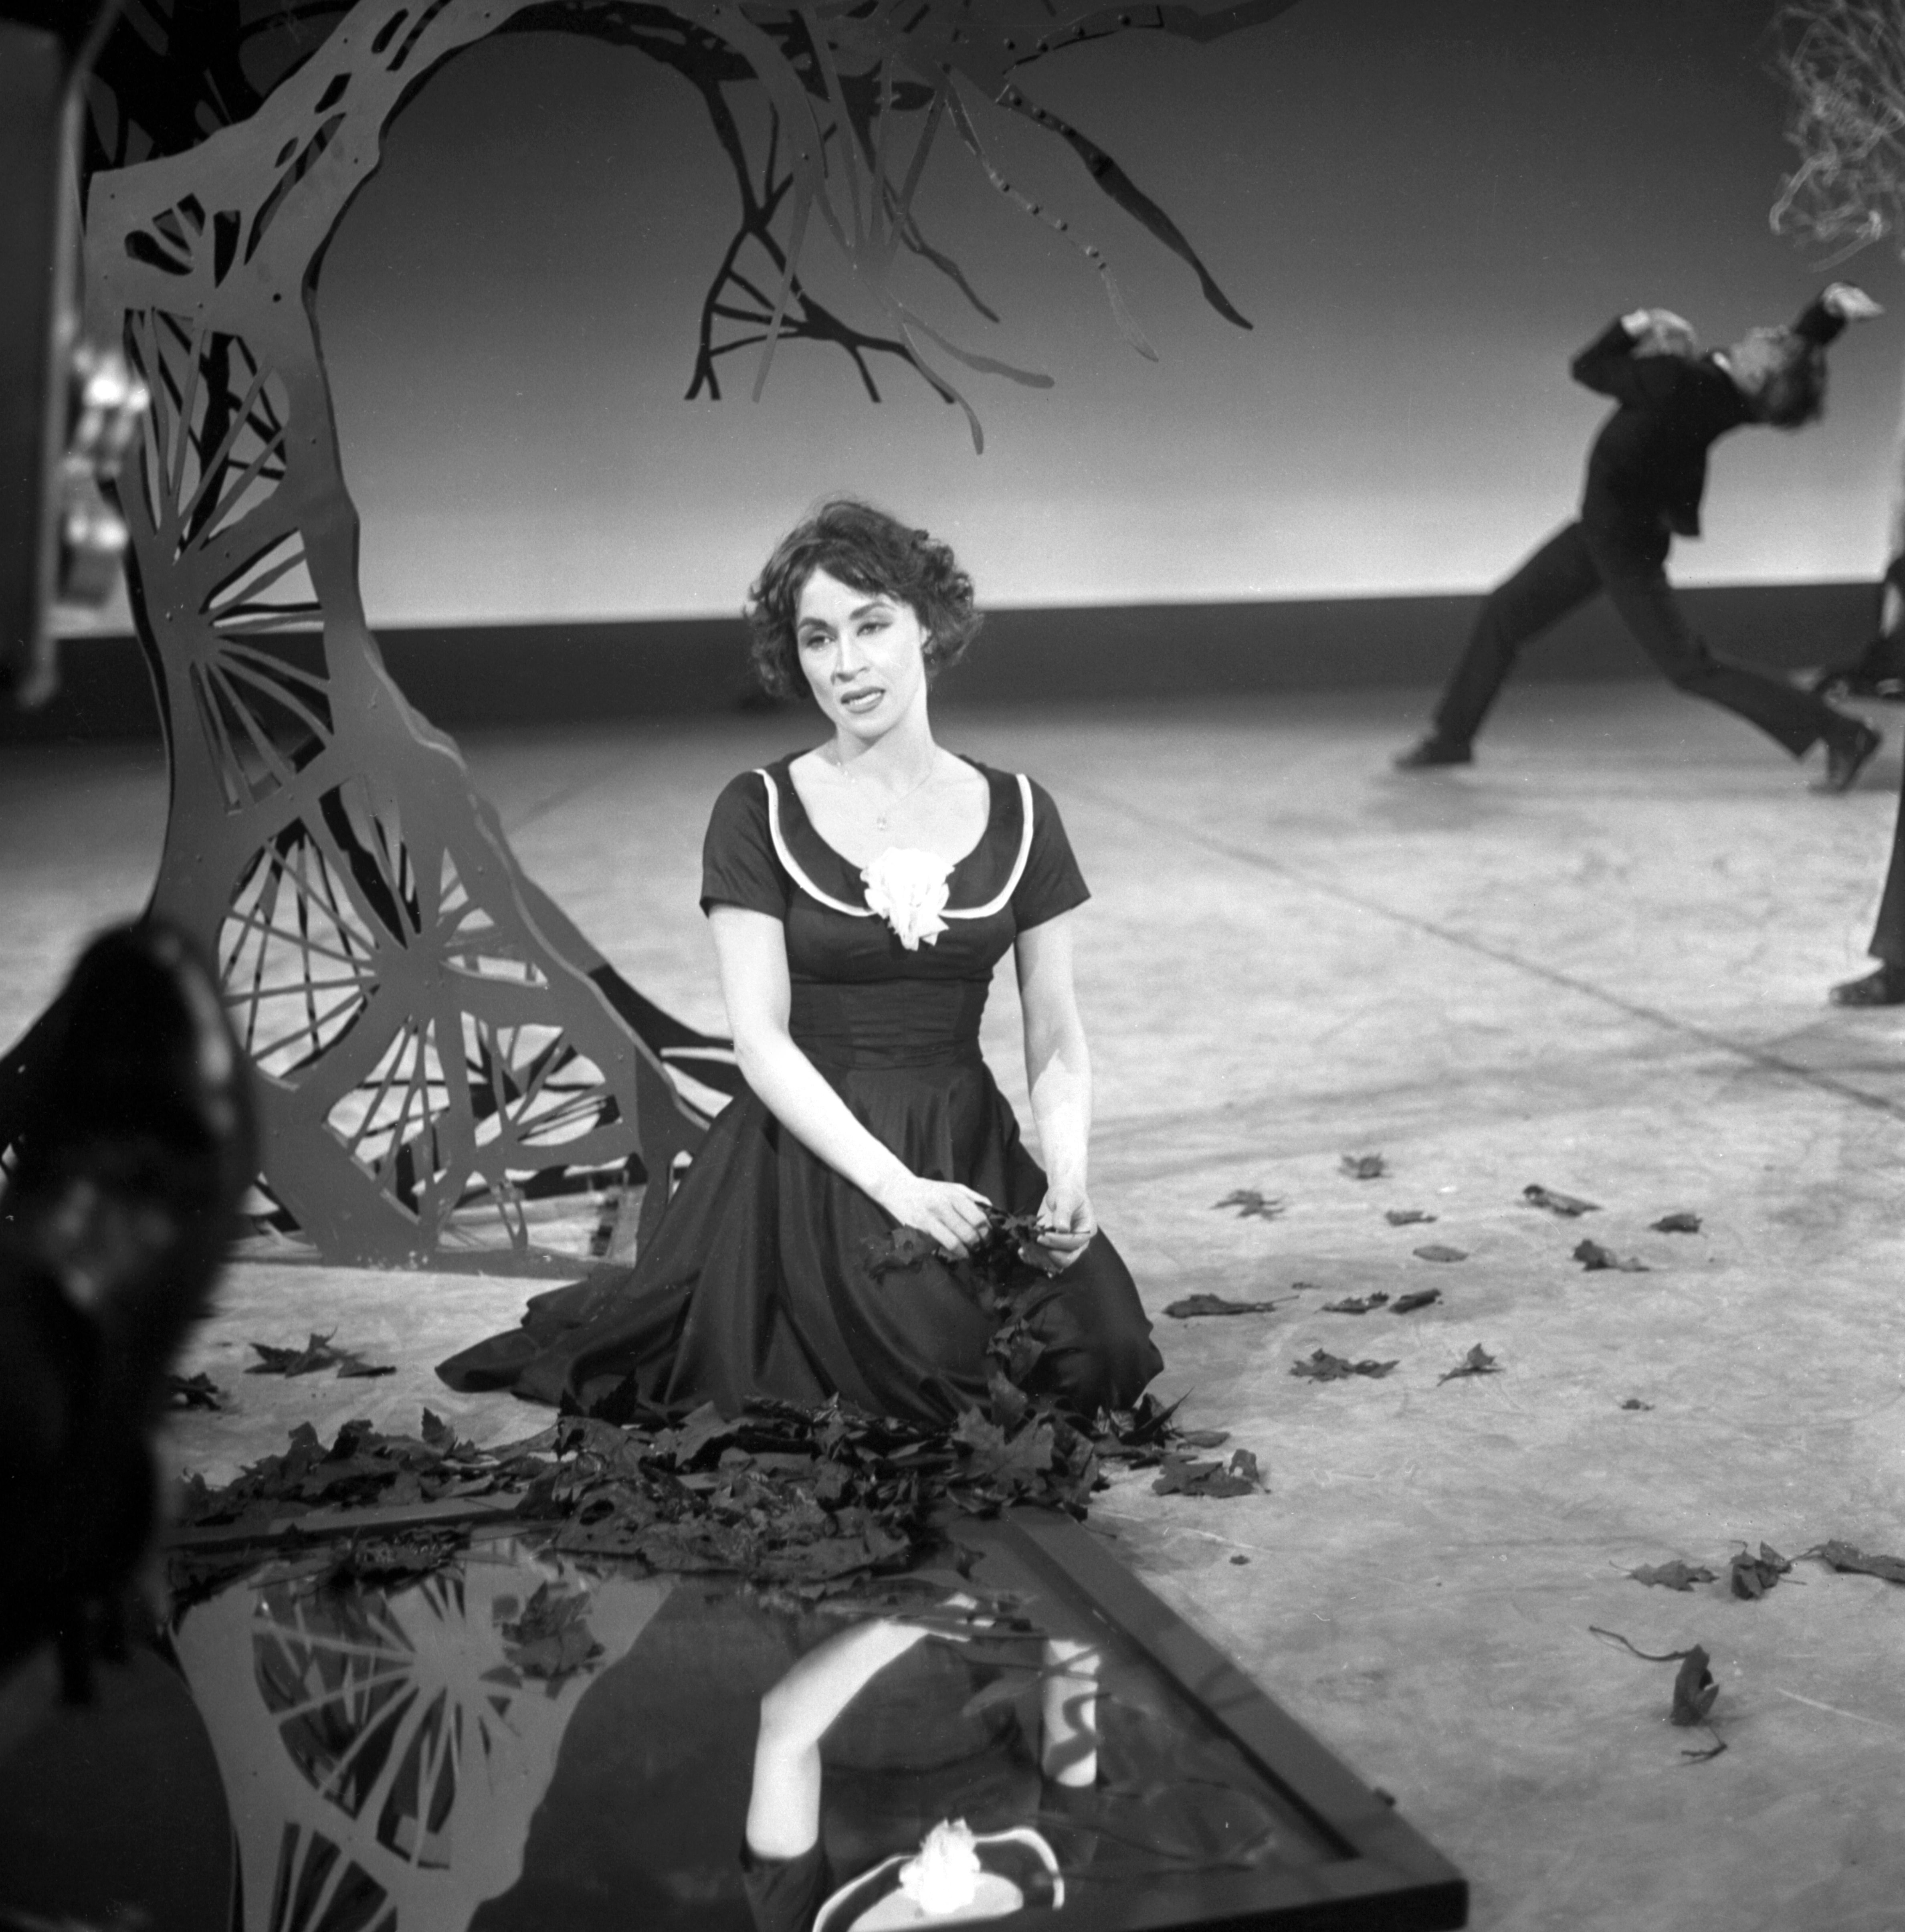 Chita River sits on stage during a performance, looking off to the side. A man is seen moving behind her. The set includes a fake tree. 